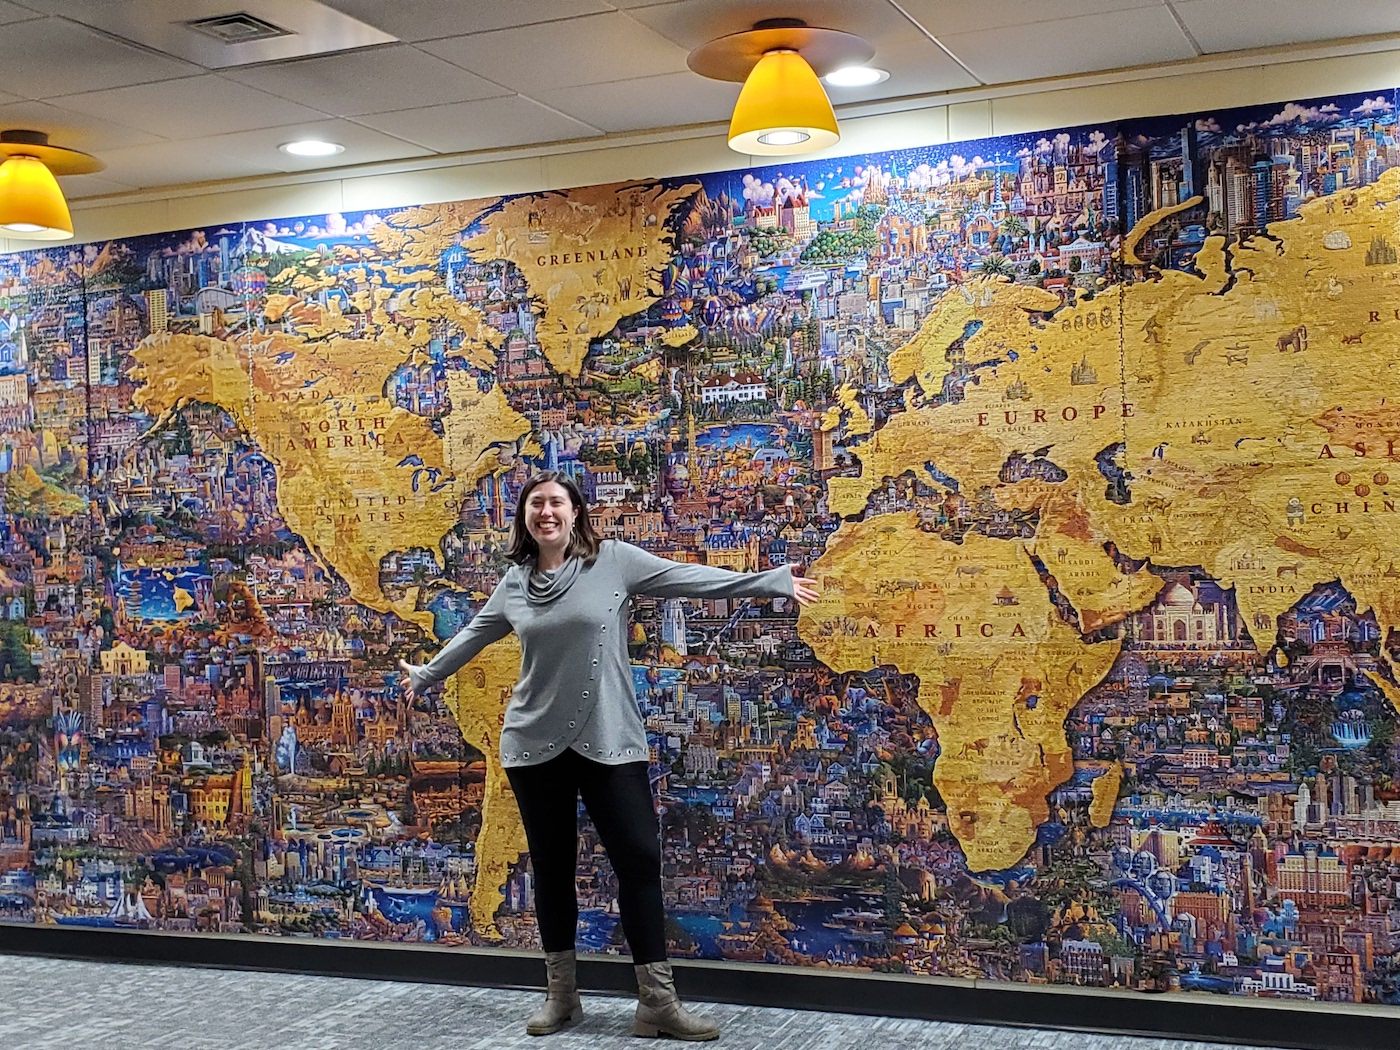 A woman with her arms spread out stands in front of a massive world map puzzle.